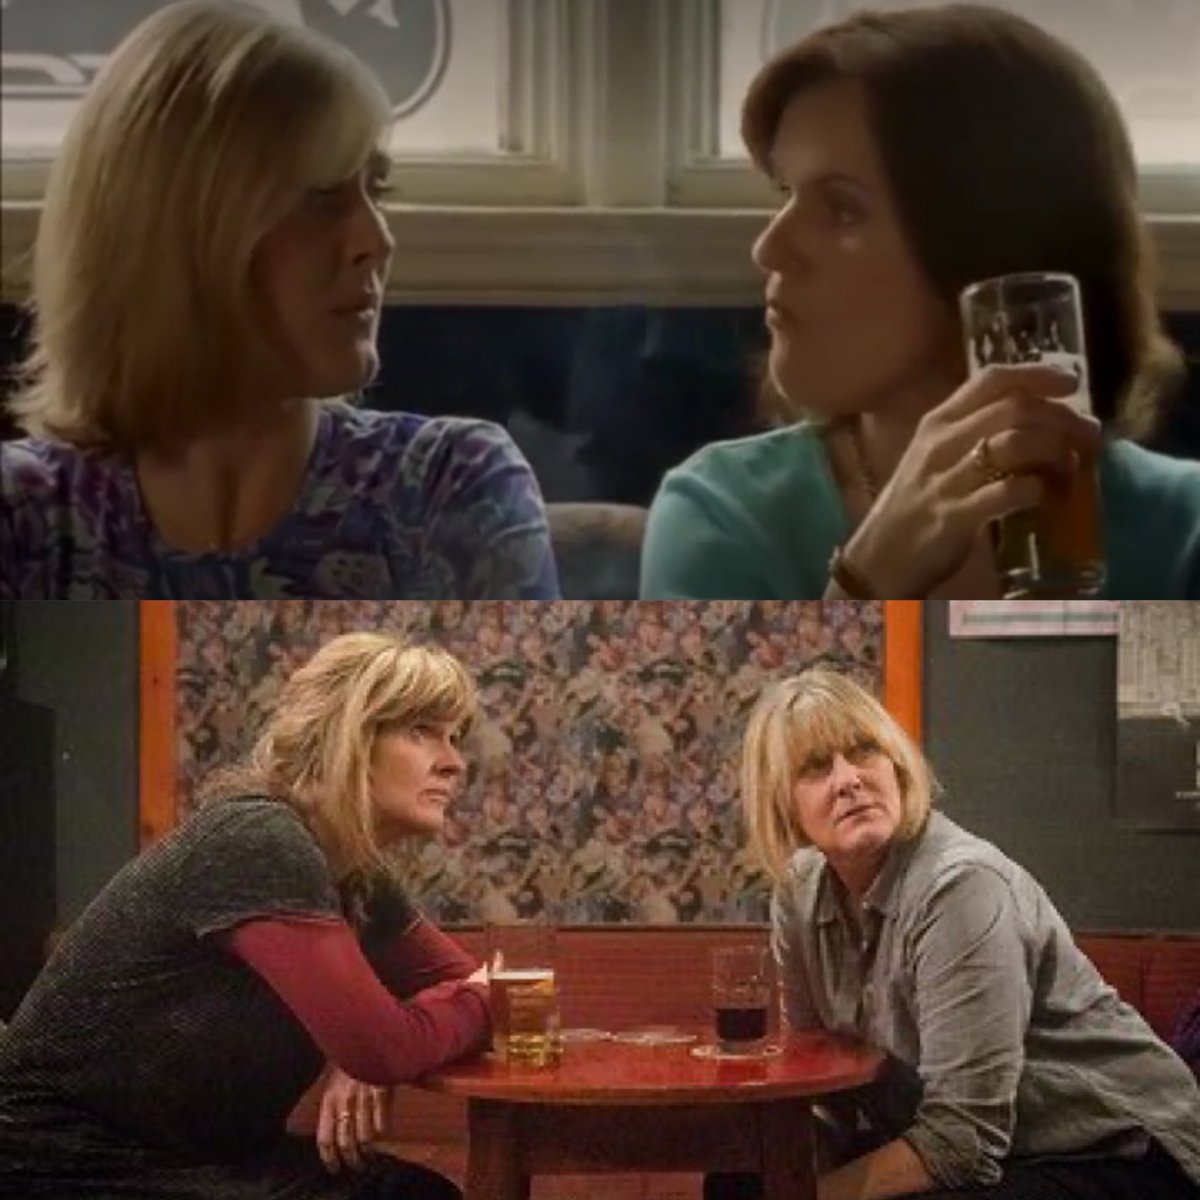 This pair of actors. Perfection then and now.
#SarahLancashire #SiobhanFinneran #HappyValley @happyvalleybbc @BBC